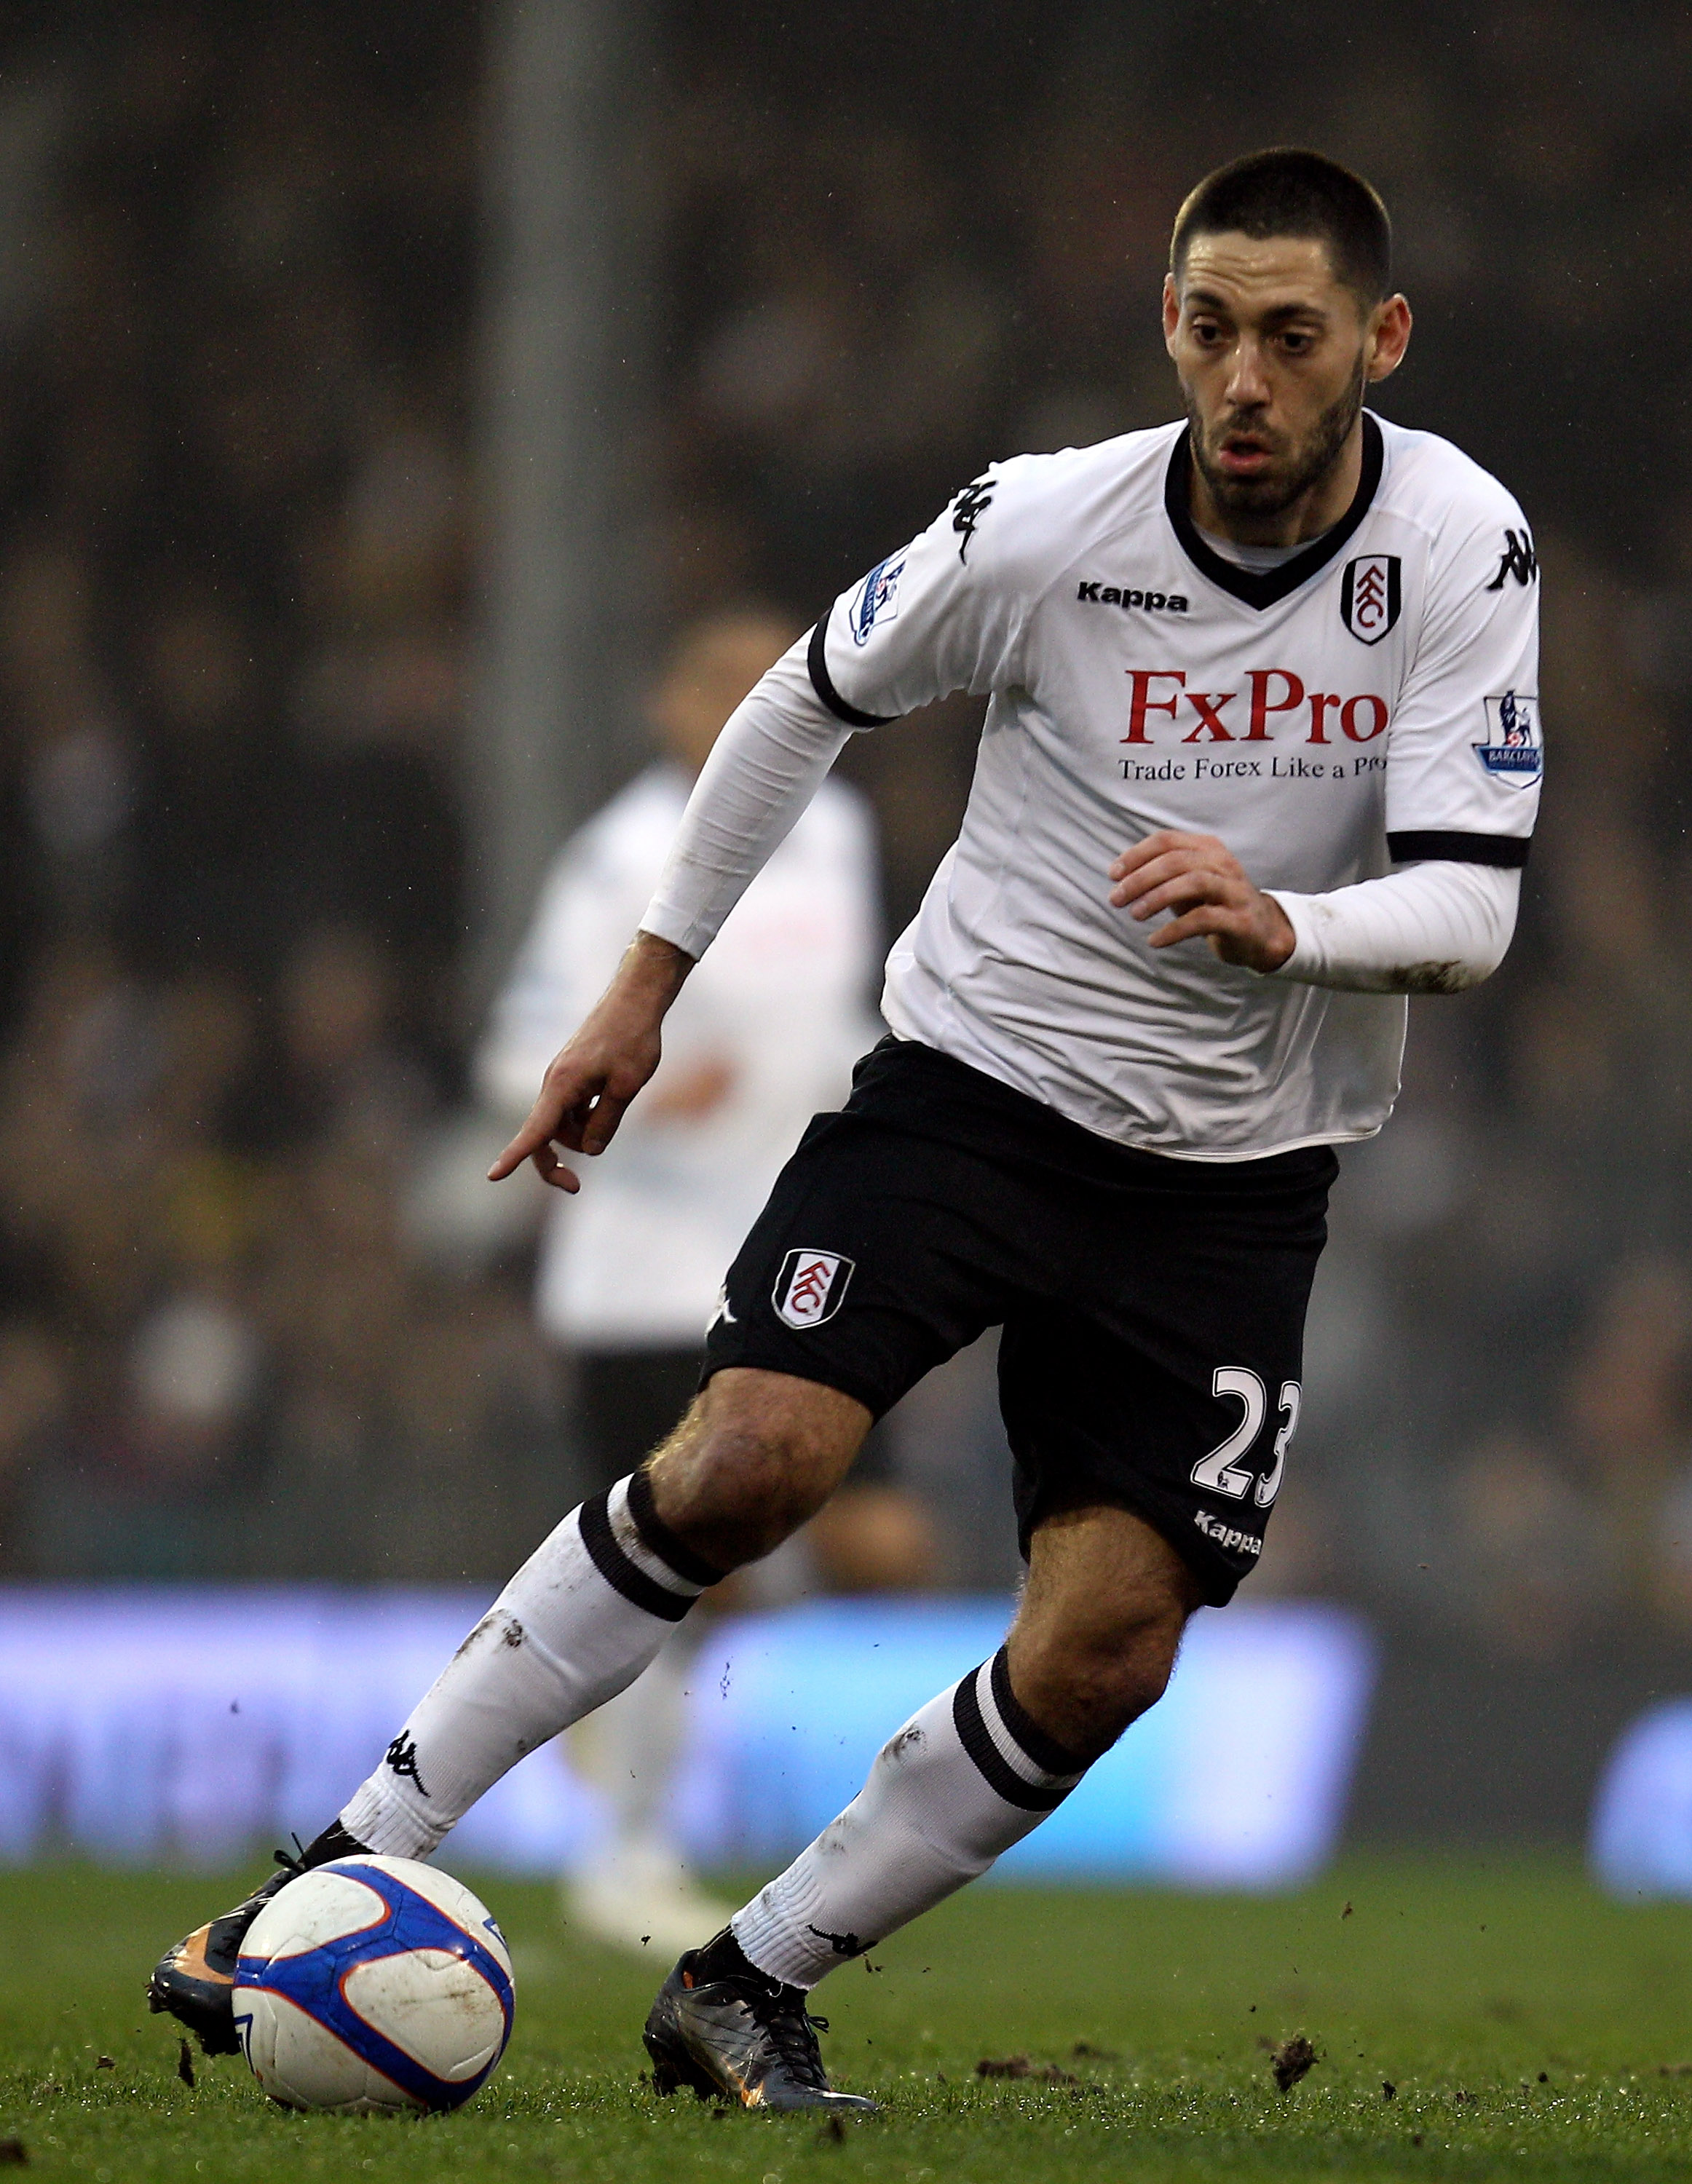 LONDON, ENGLAND - FEBRUARY 20:  Clint Dempsey of Fulham in action during the FA Cup sponsored by E.ON 5th Round match between Fulham and Bolton Wanderers at Craven Cottage on February 20, 2011 in London, England.  (Photo by Paul Gilham/Getty Images)